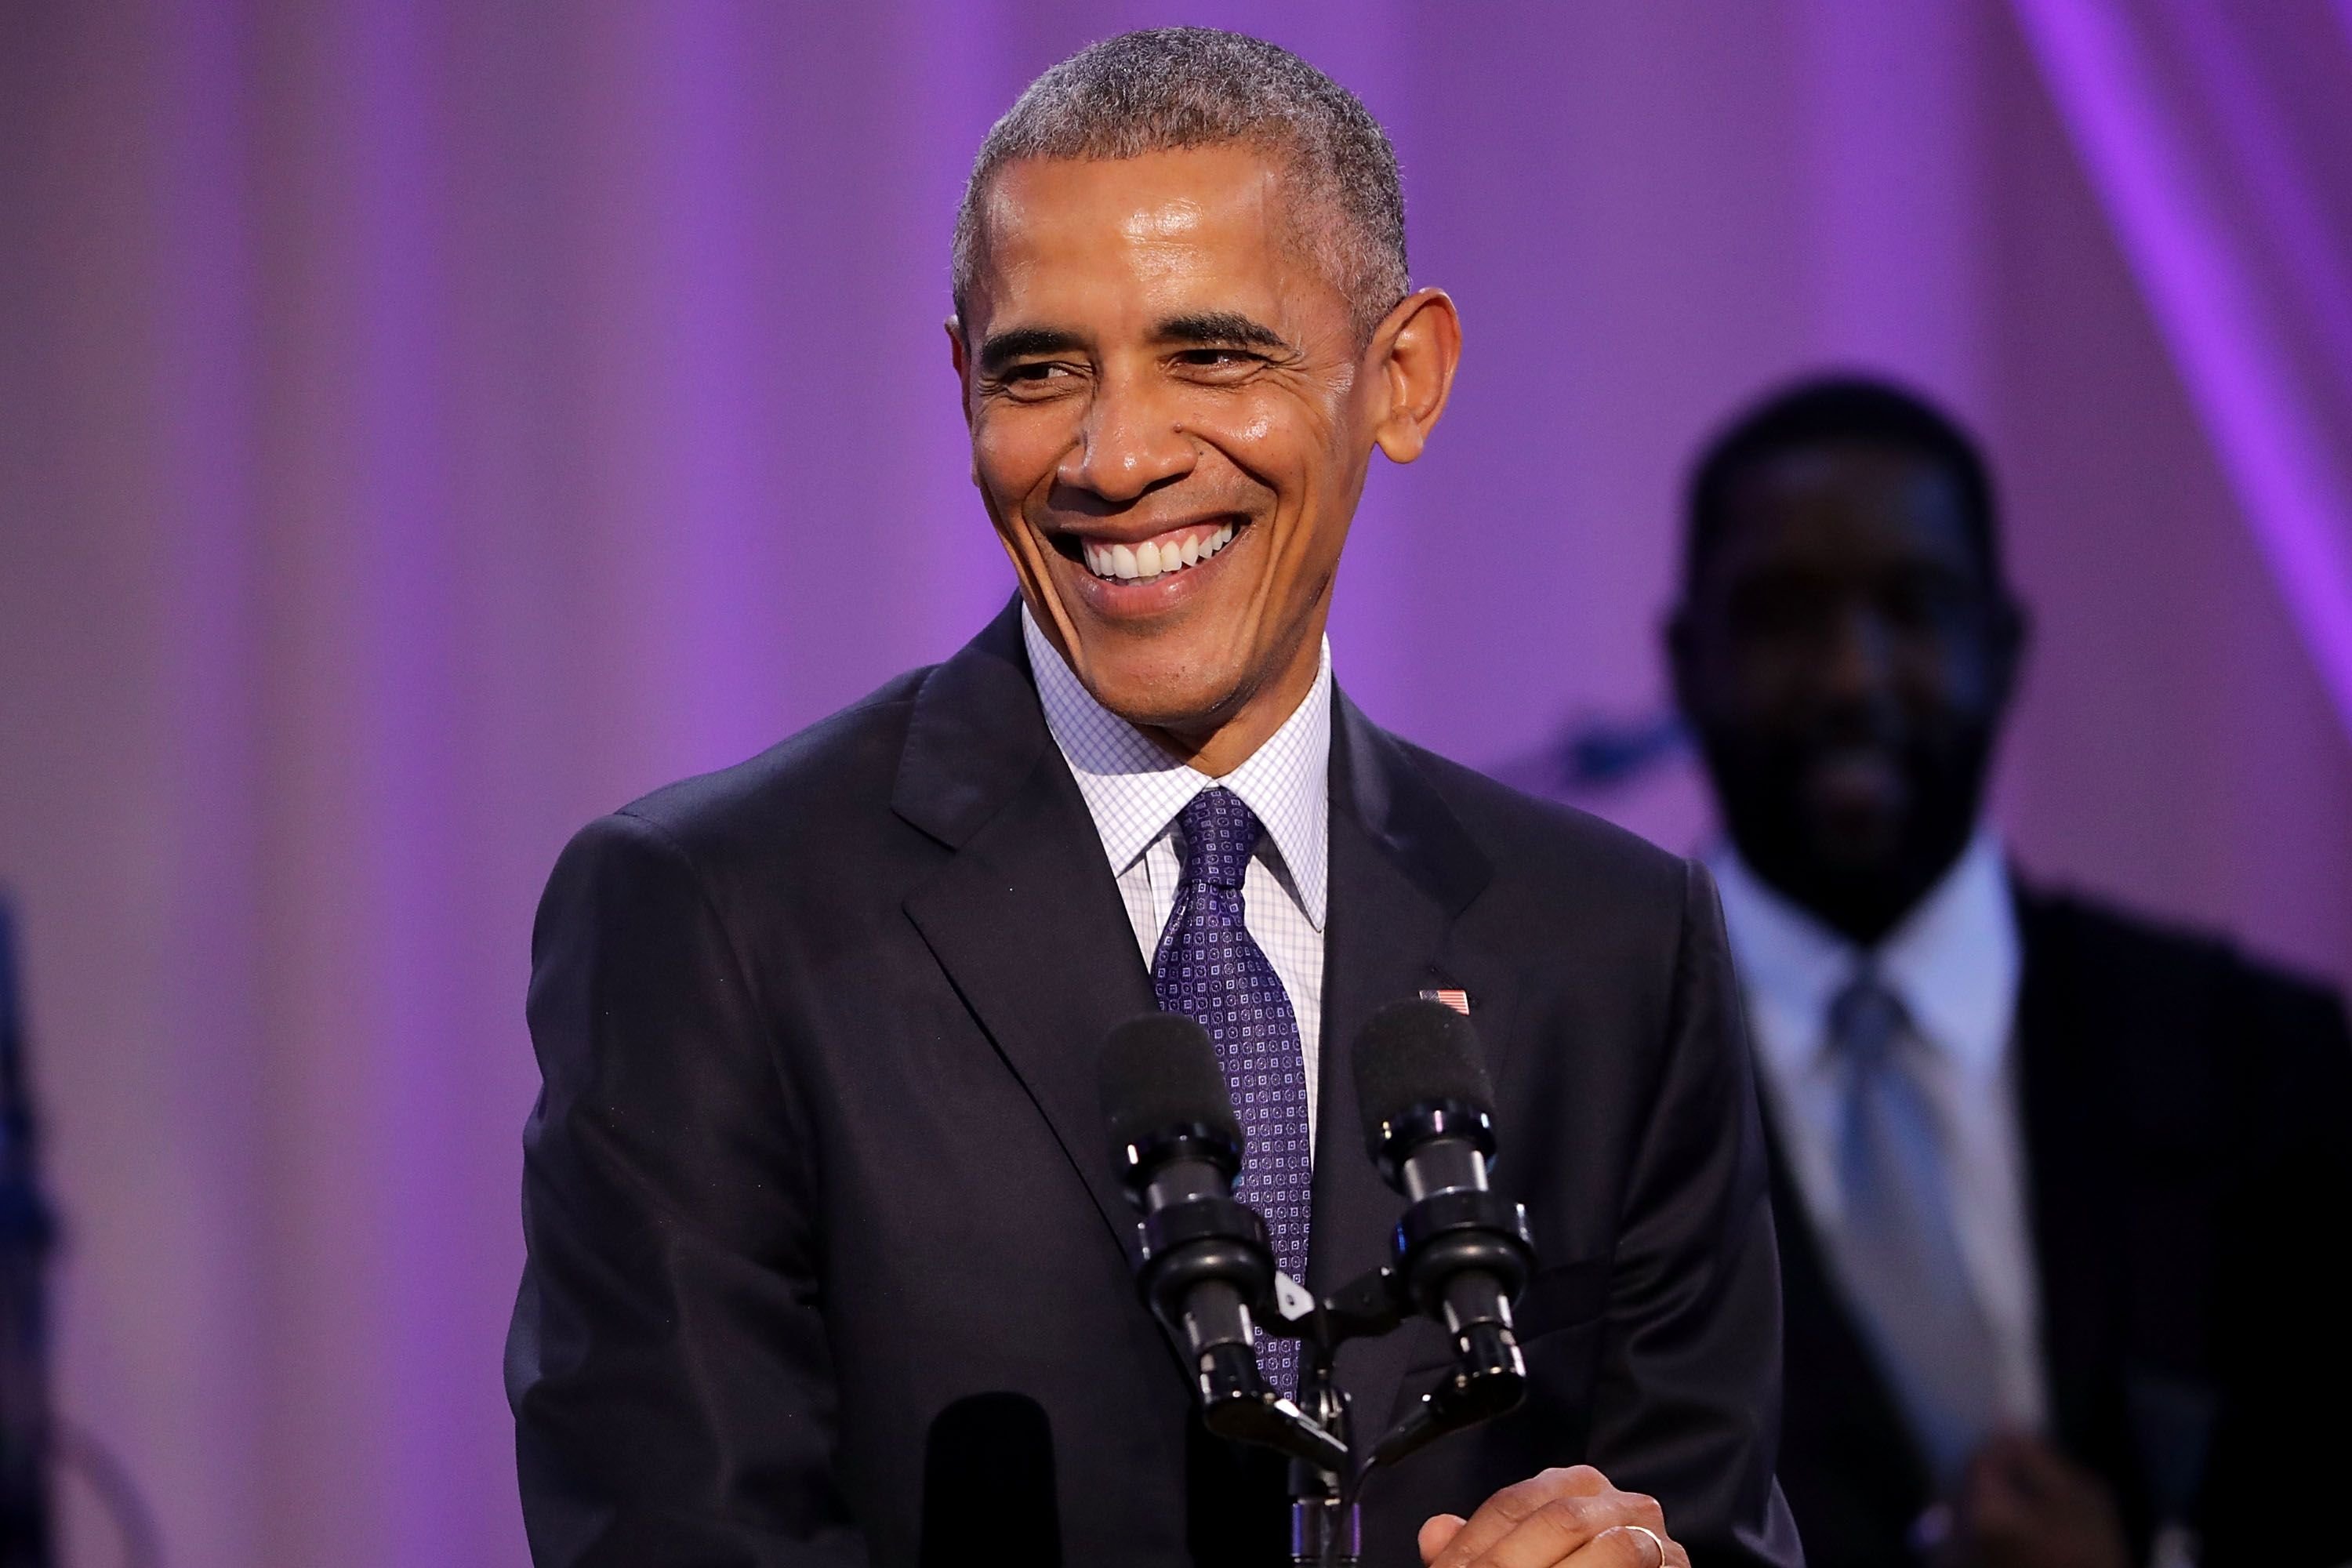 Barack Obama delivers remarks at the BET's 'Love and Happiness: A Musical Experience" in a tent on the South Lawn of the White House October 21, 2016 | Photo: Getty Images